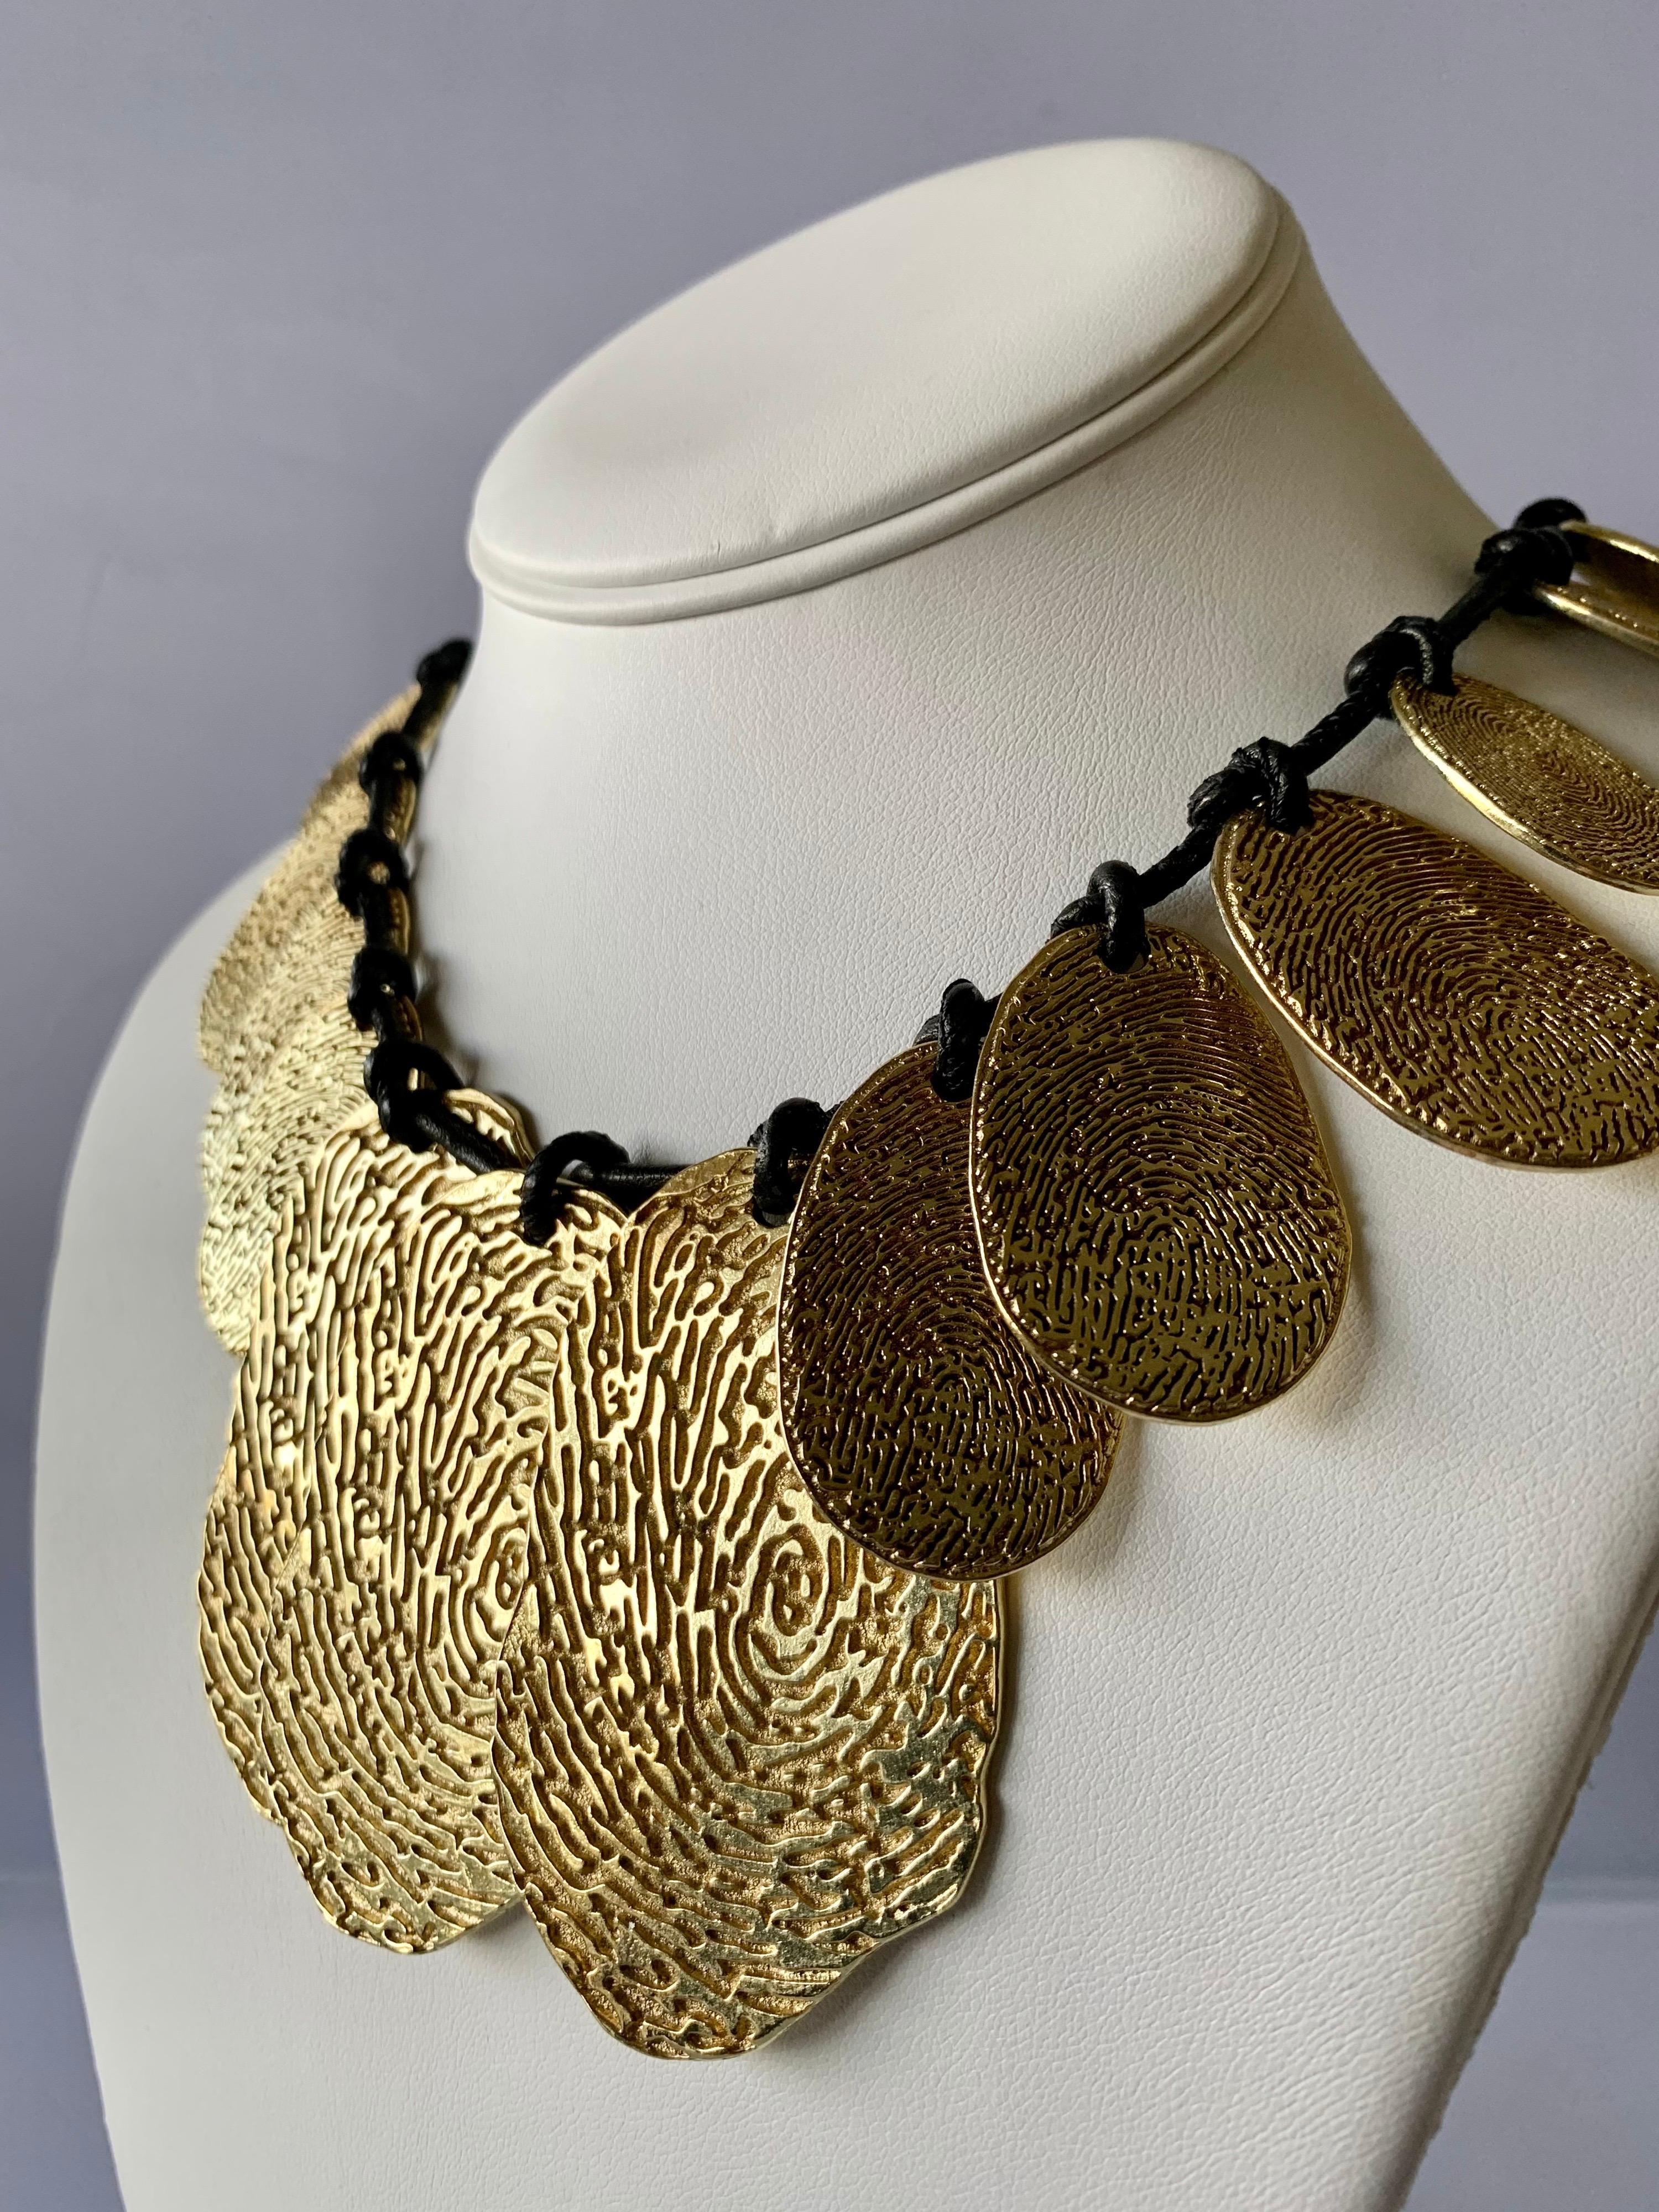 Contemporary  Yves Saint Laurent gold-tone high polish fingerprint statement necklace with adjustable cord - designed by Stefano Pilati for YSL in spring/summer 2011. Signed YSL.